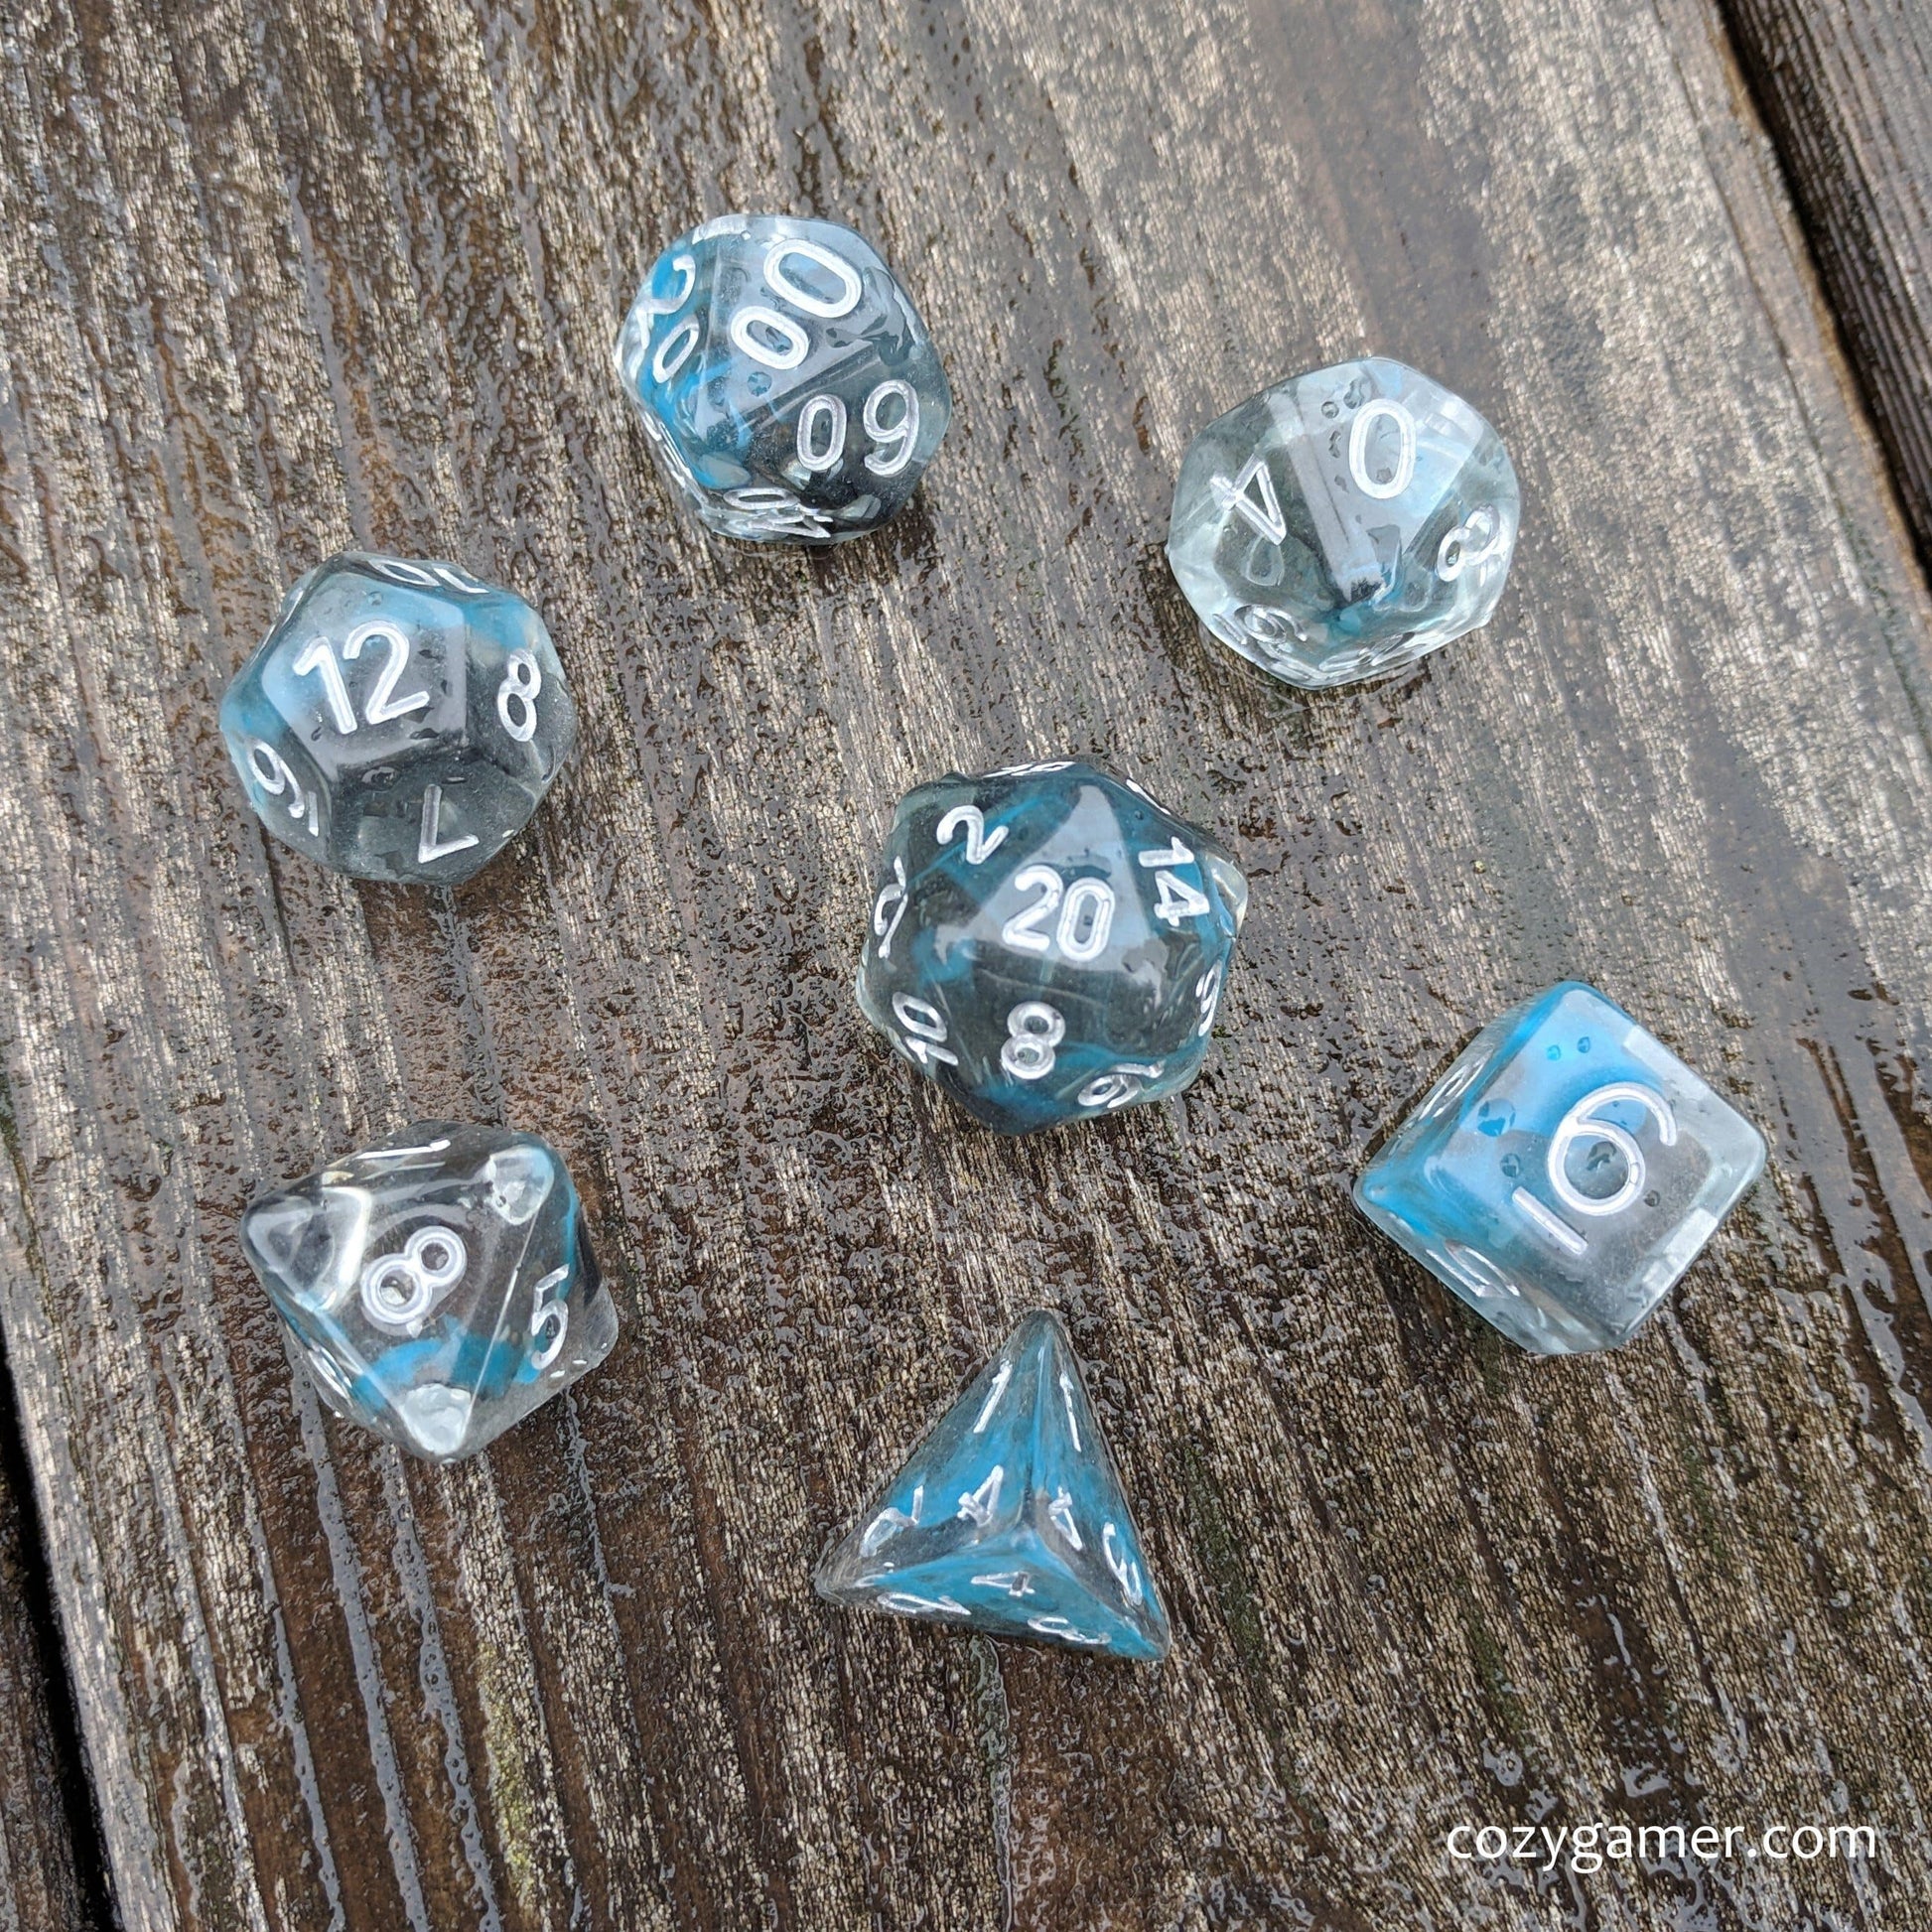 Sea Wraith Dice Set, Transluscent Resin Dice with Black and Teal Ink - CozyGamer